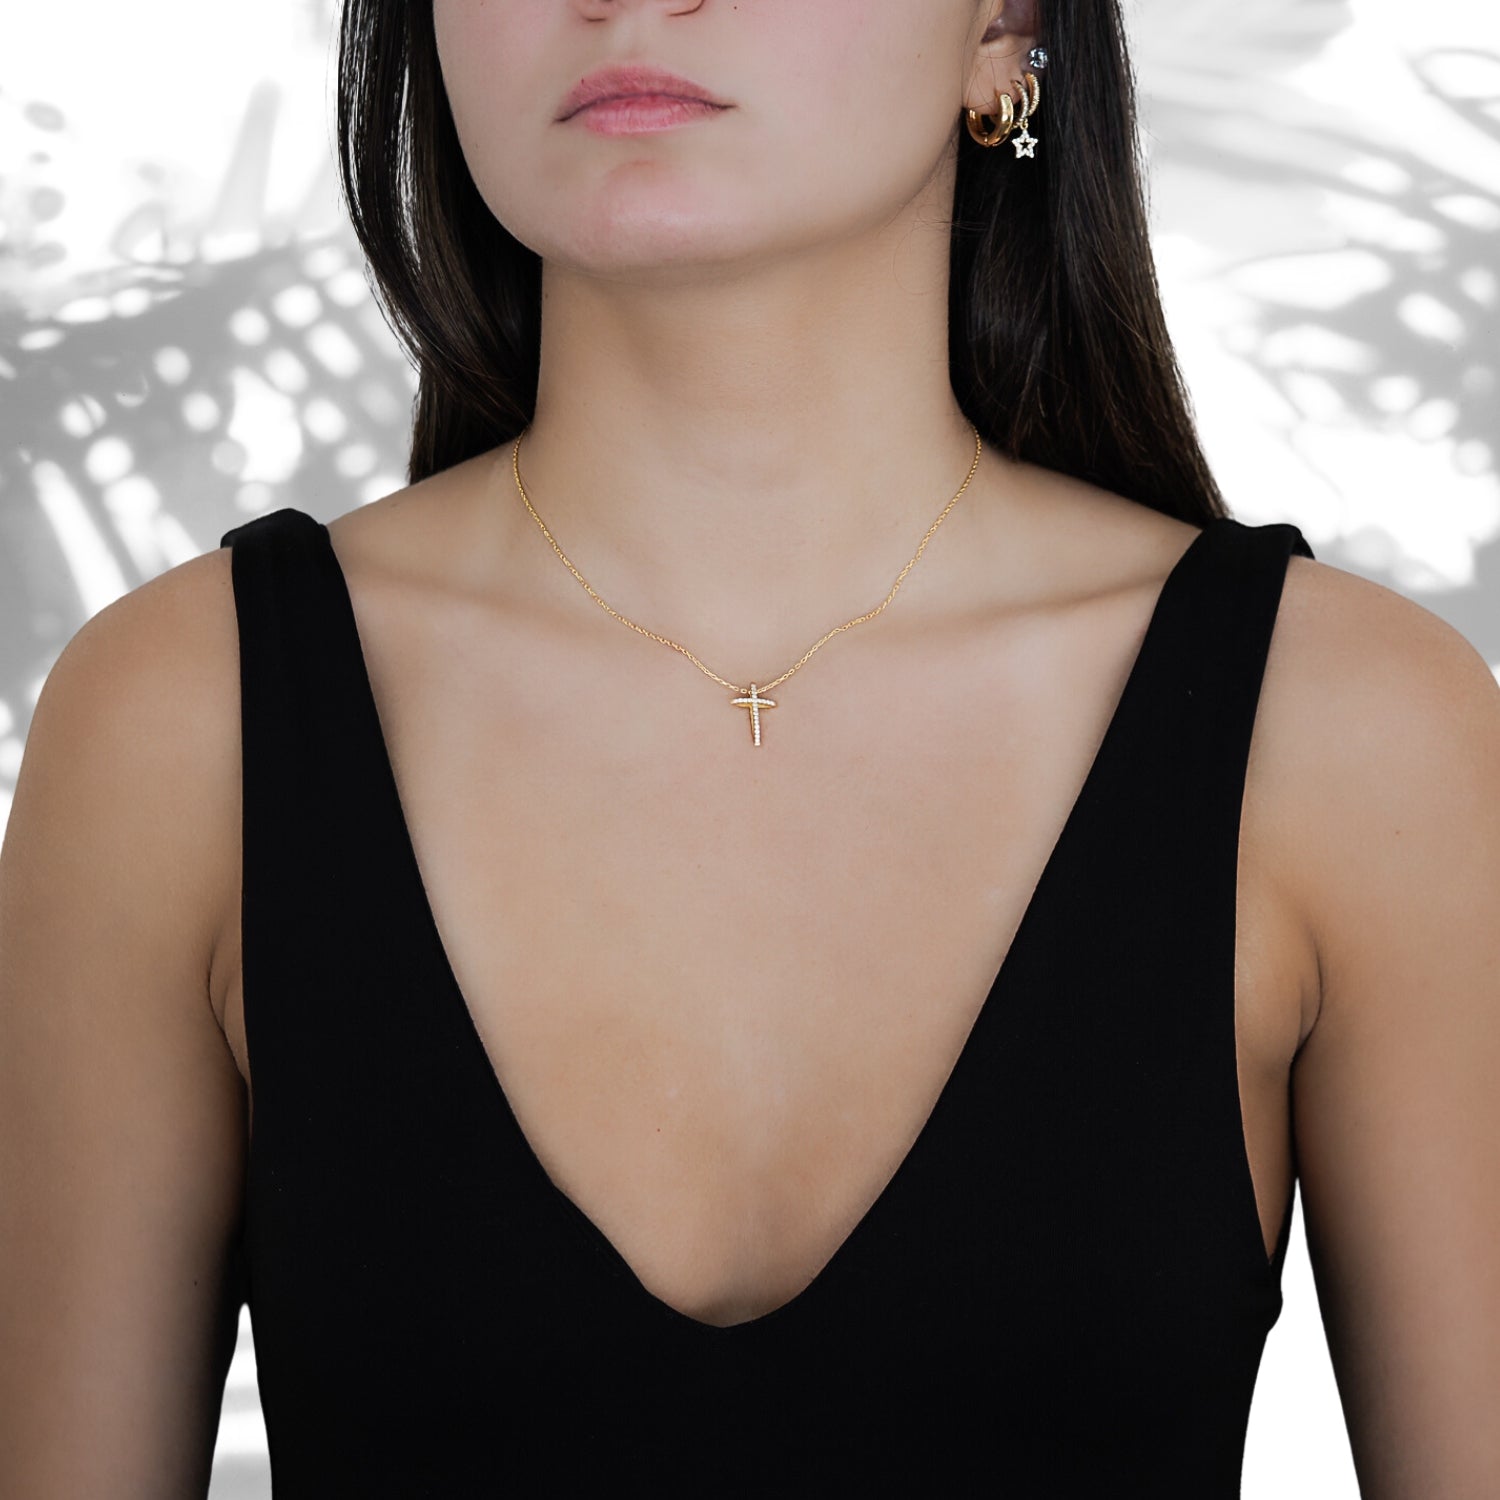 The Unique Cross Diamond Necklace beautifully complementing the model&#39;s outfit with its sparkle and unique design.